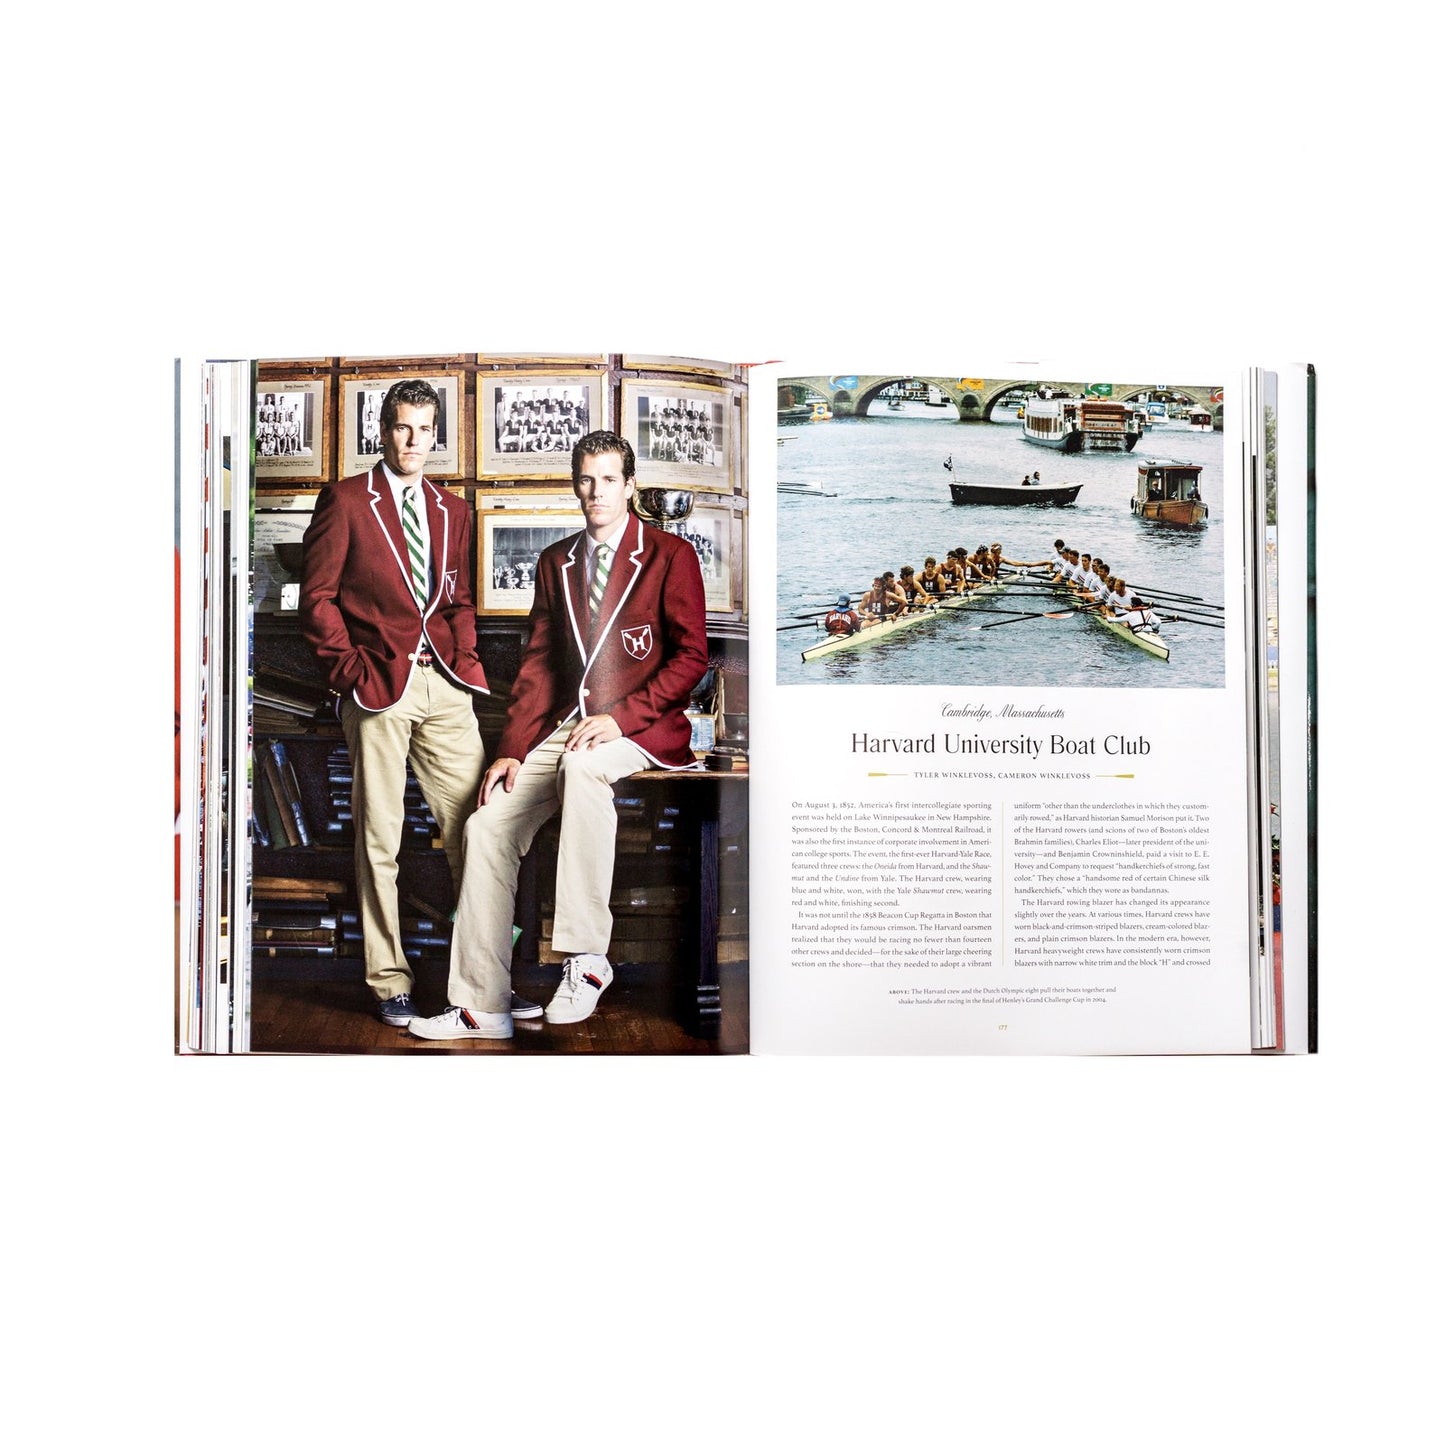 Rowing Blazers - Signed Red Edition